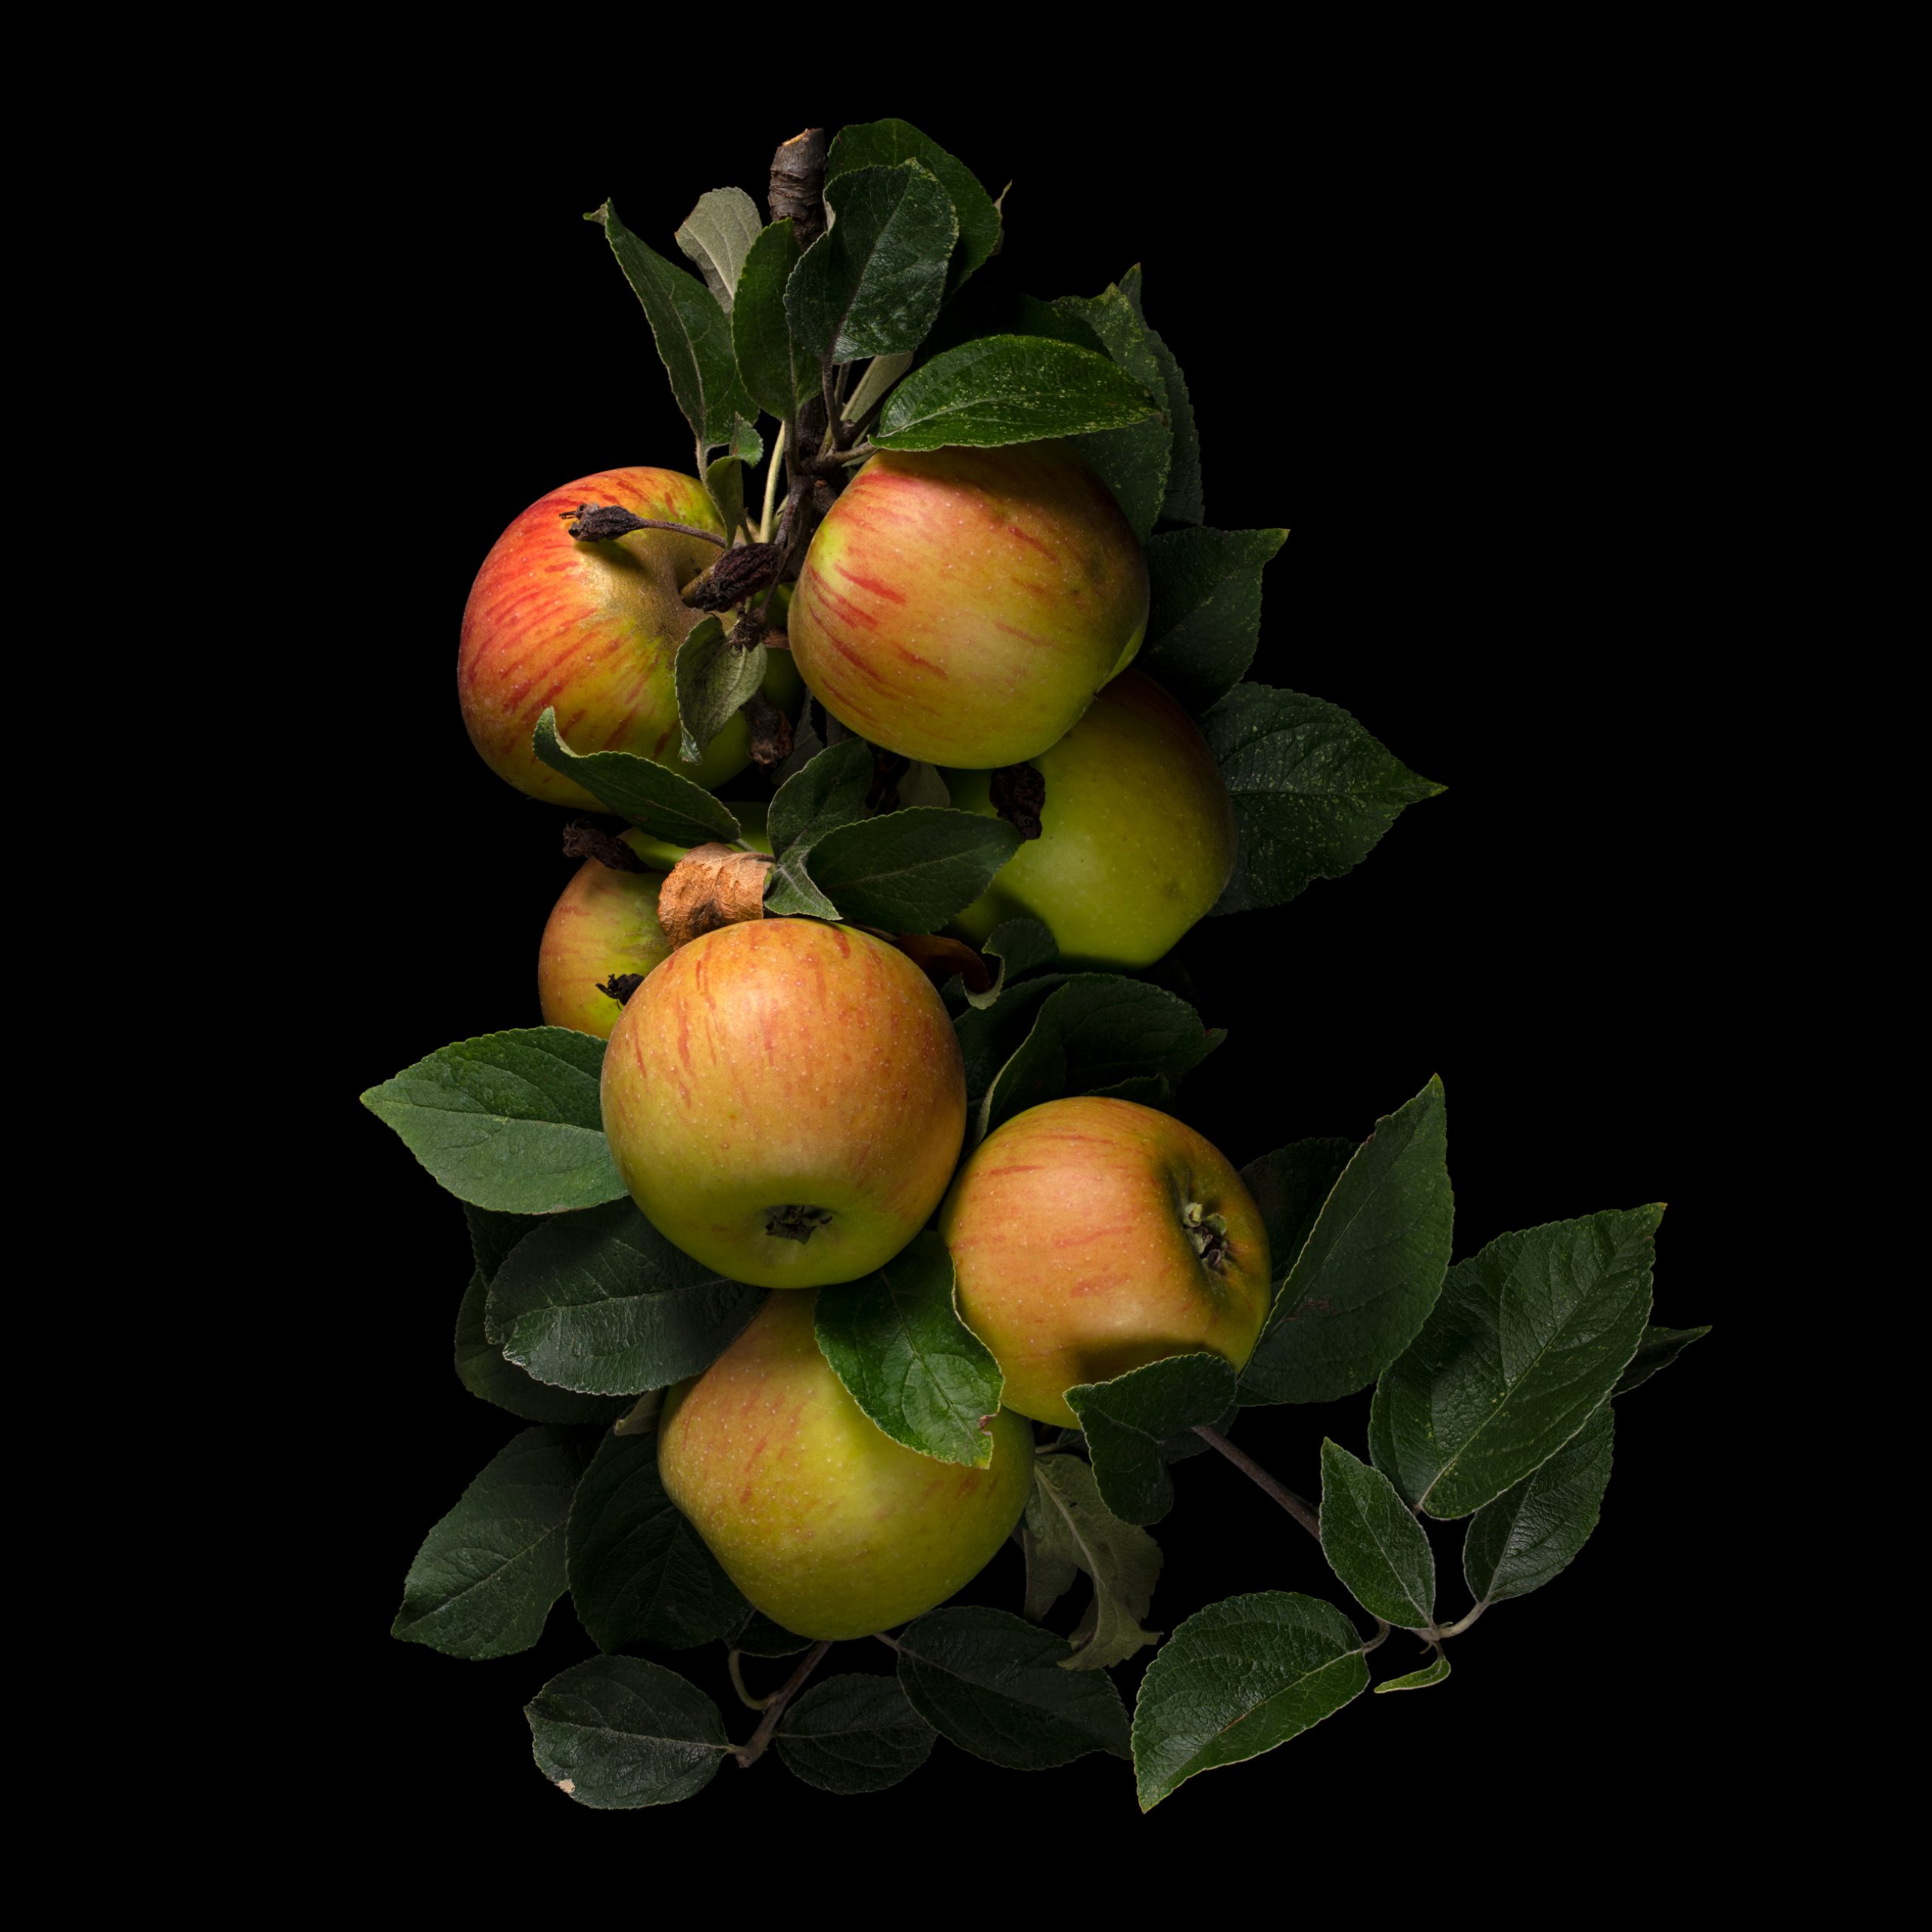 King of the Pippins (apple cultivar): Malus domestica ‚King of the Pippins‘